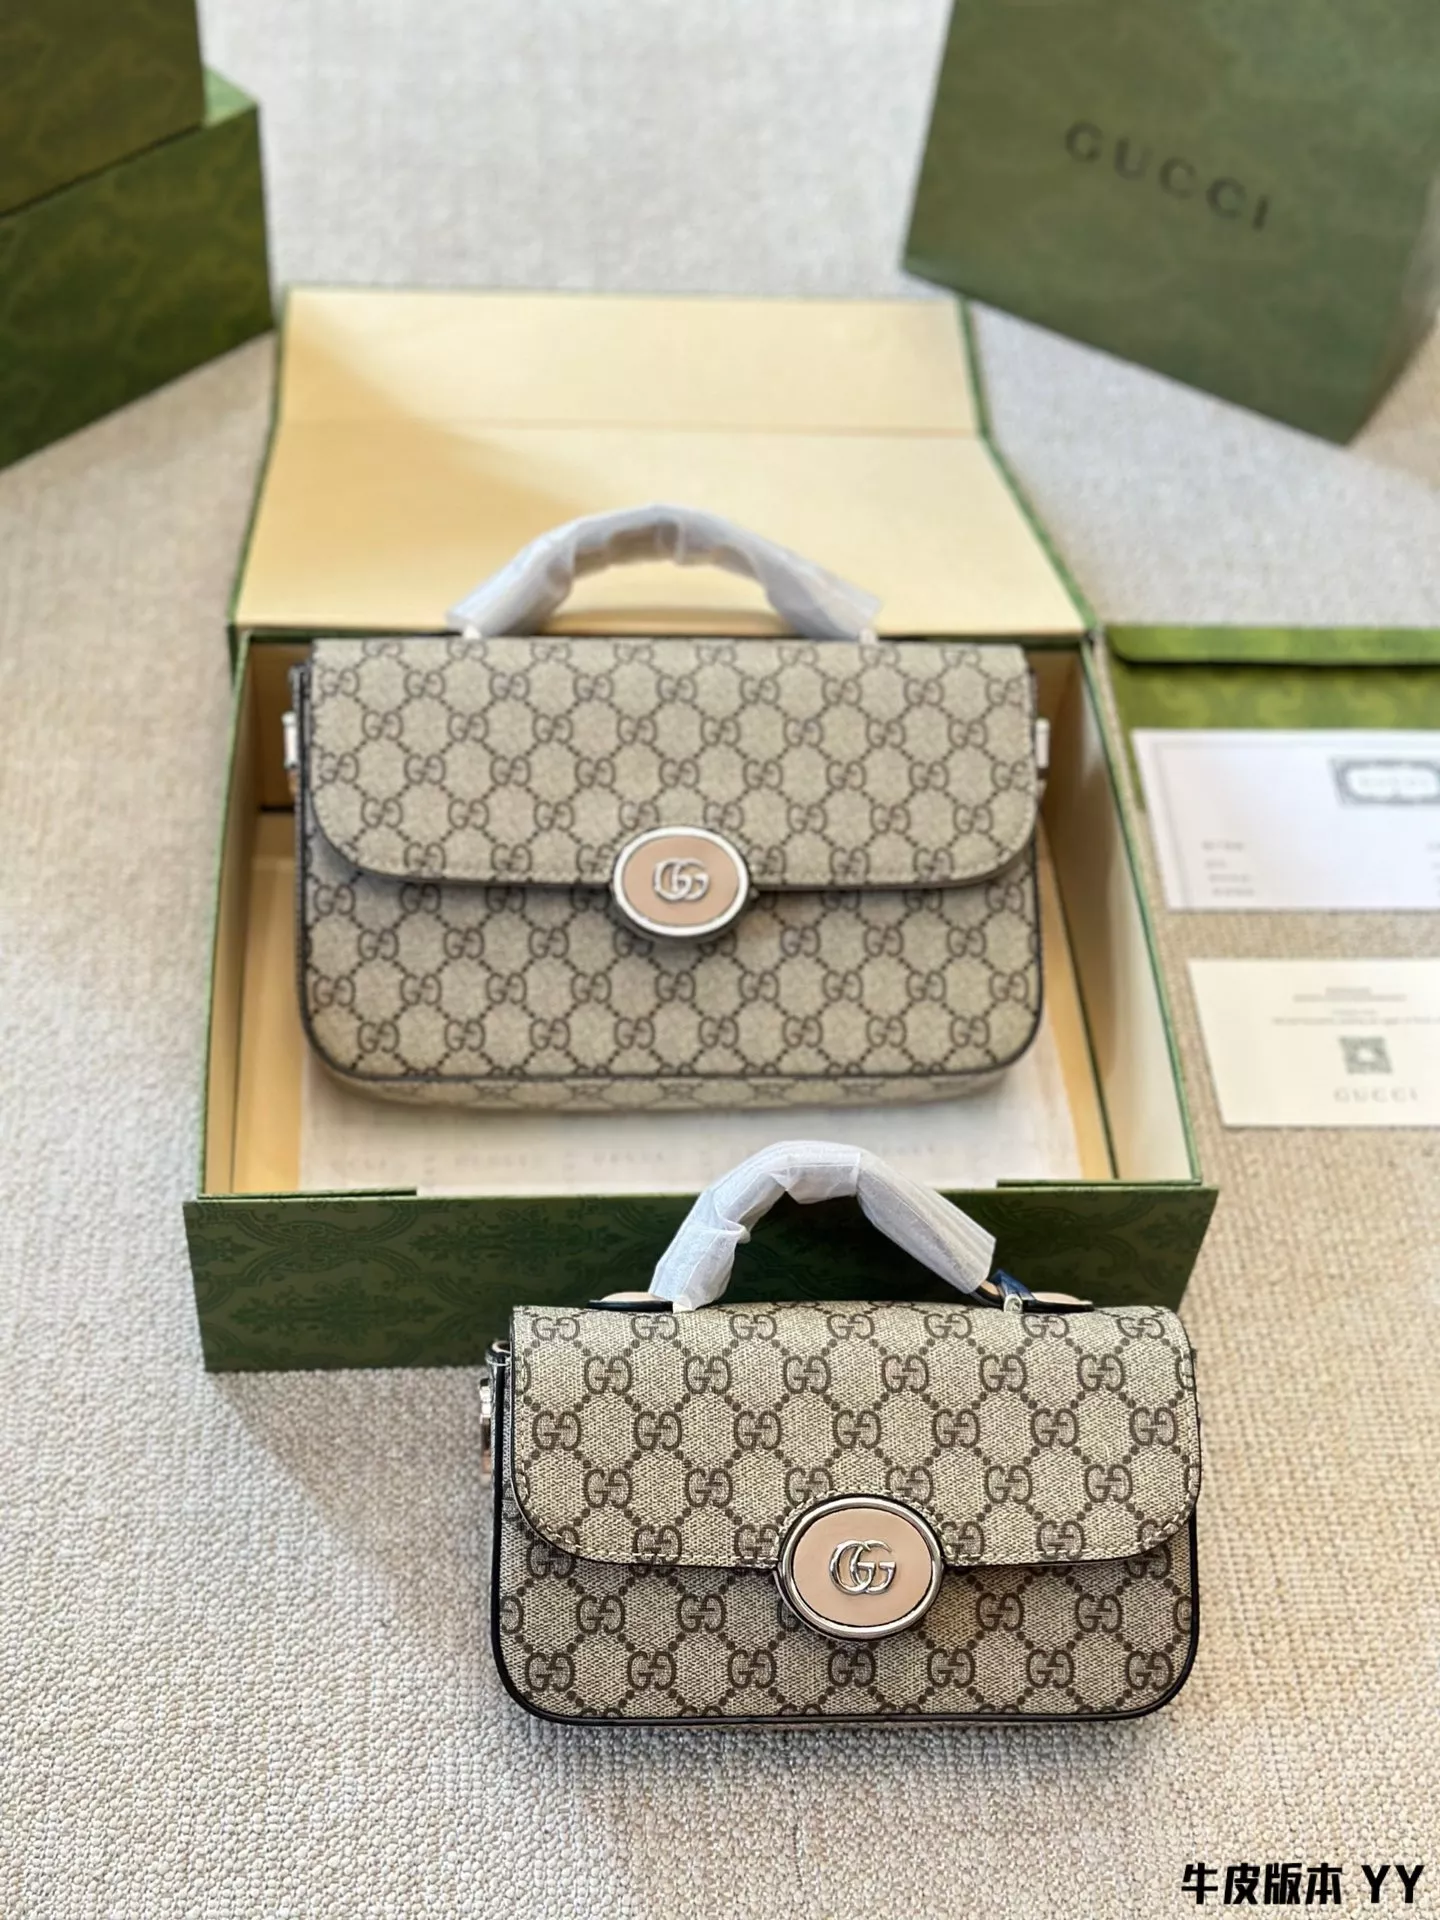 ☆ High quality ☆ GUCCI shoulder bags, handbags, Gallery posted by 福岡 泰美